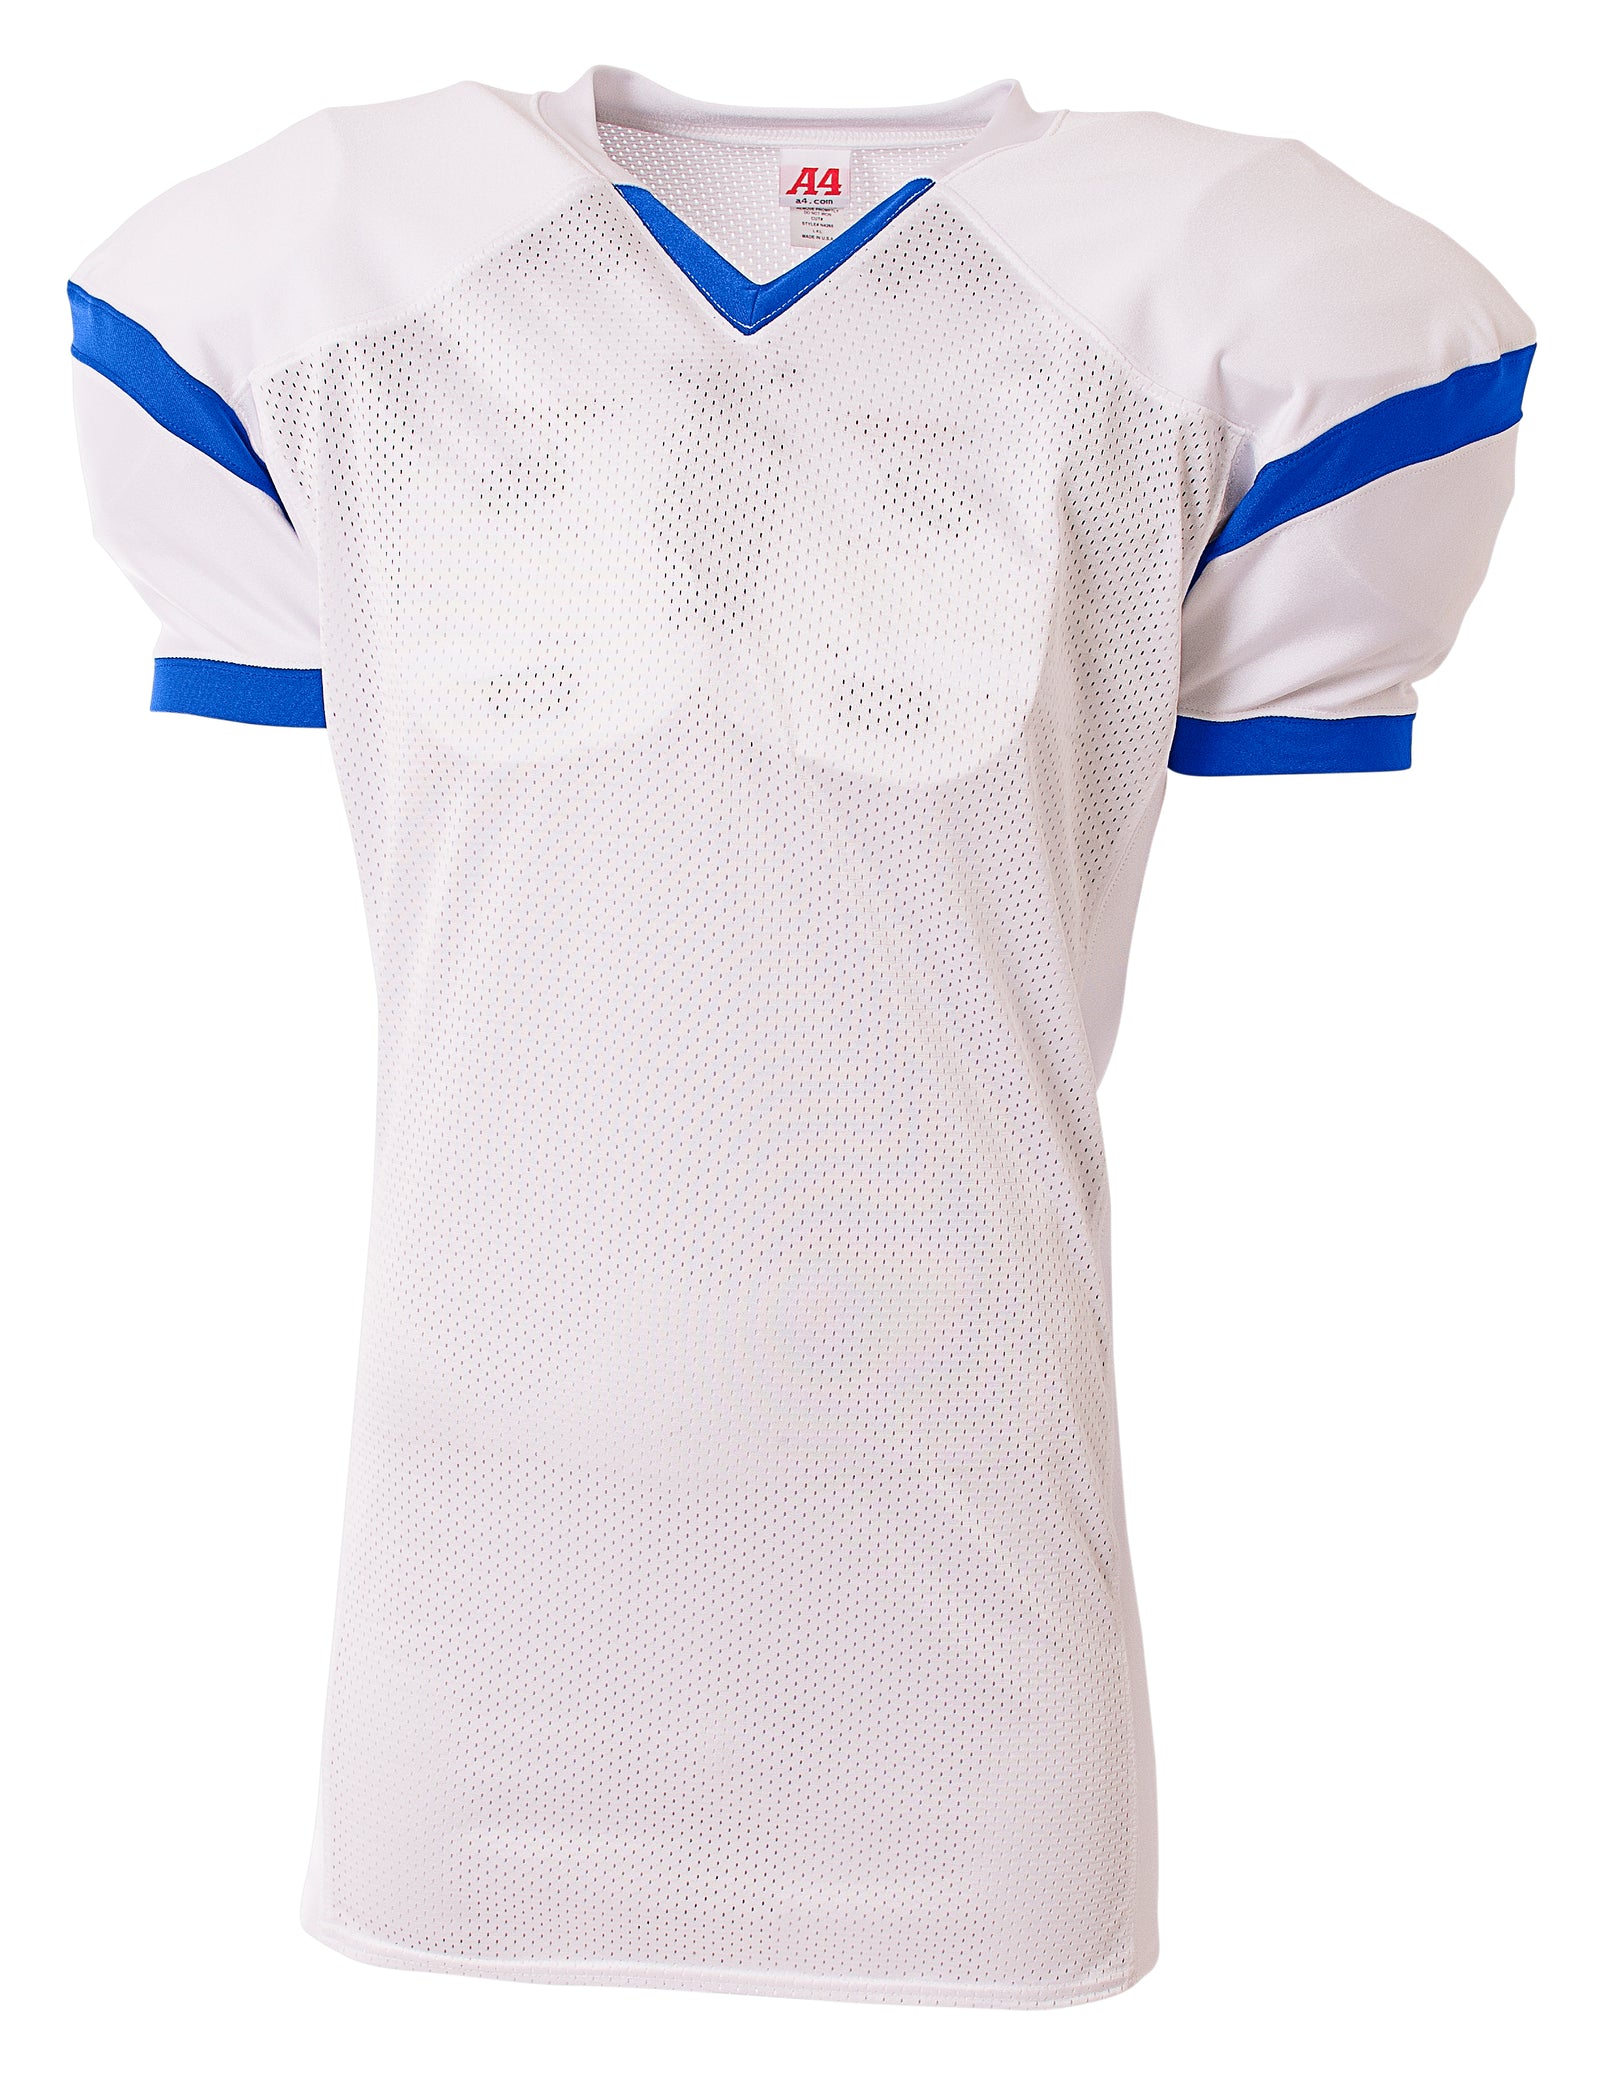 White/royal A4 A4 Rollout Football Jersey